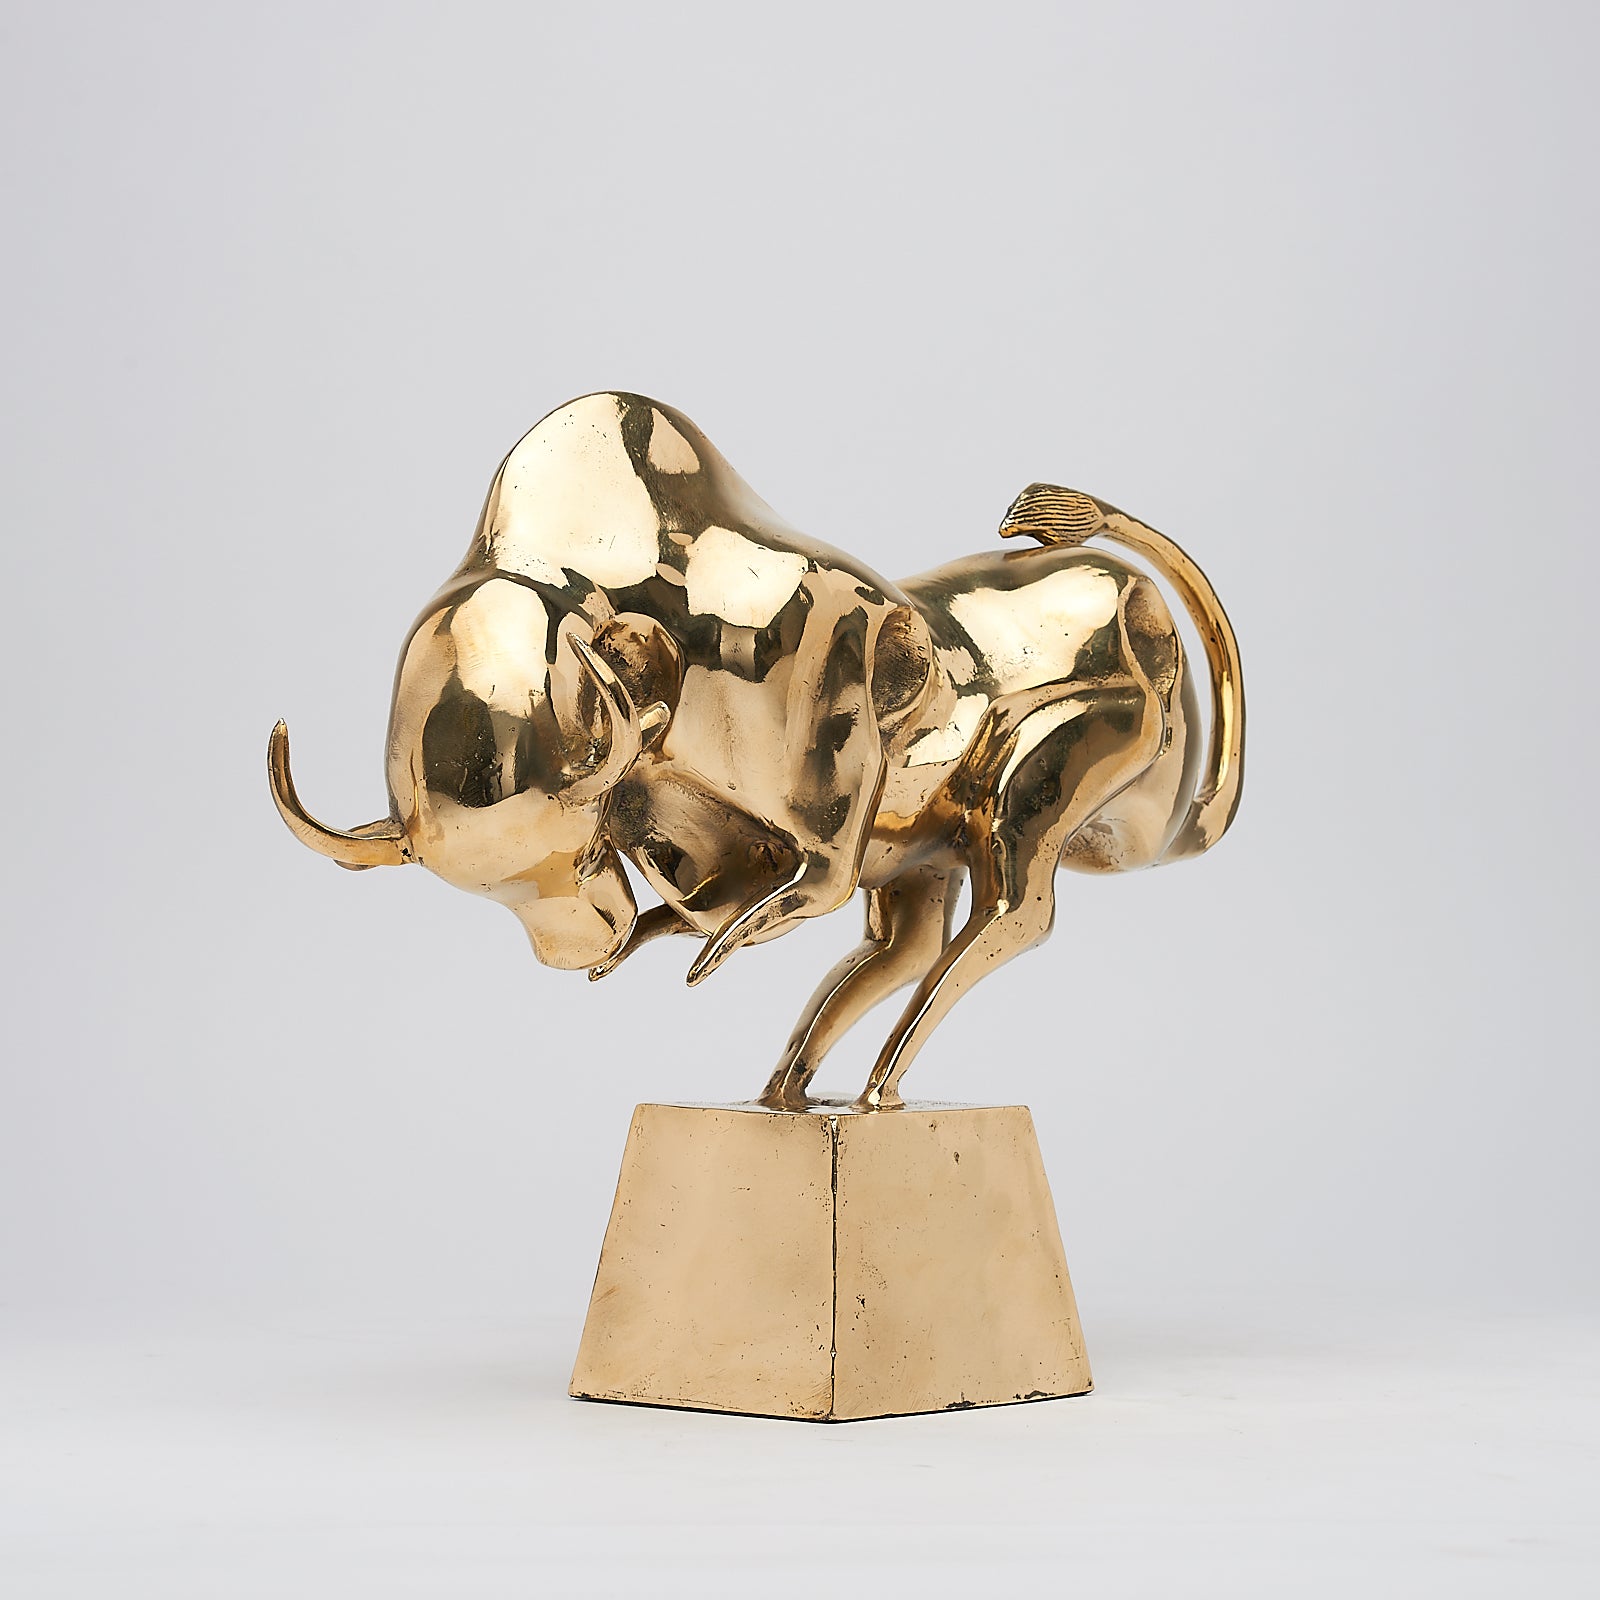 Cubist Bull in polished bronze